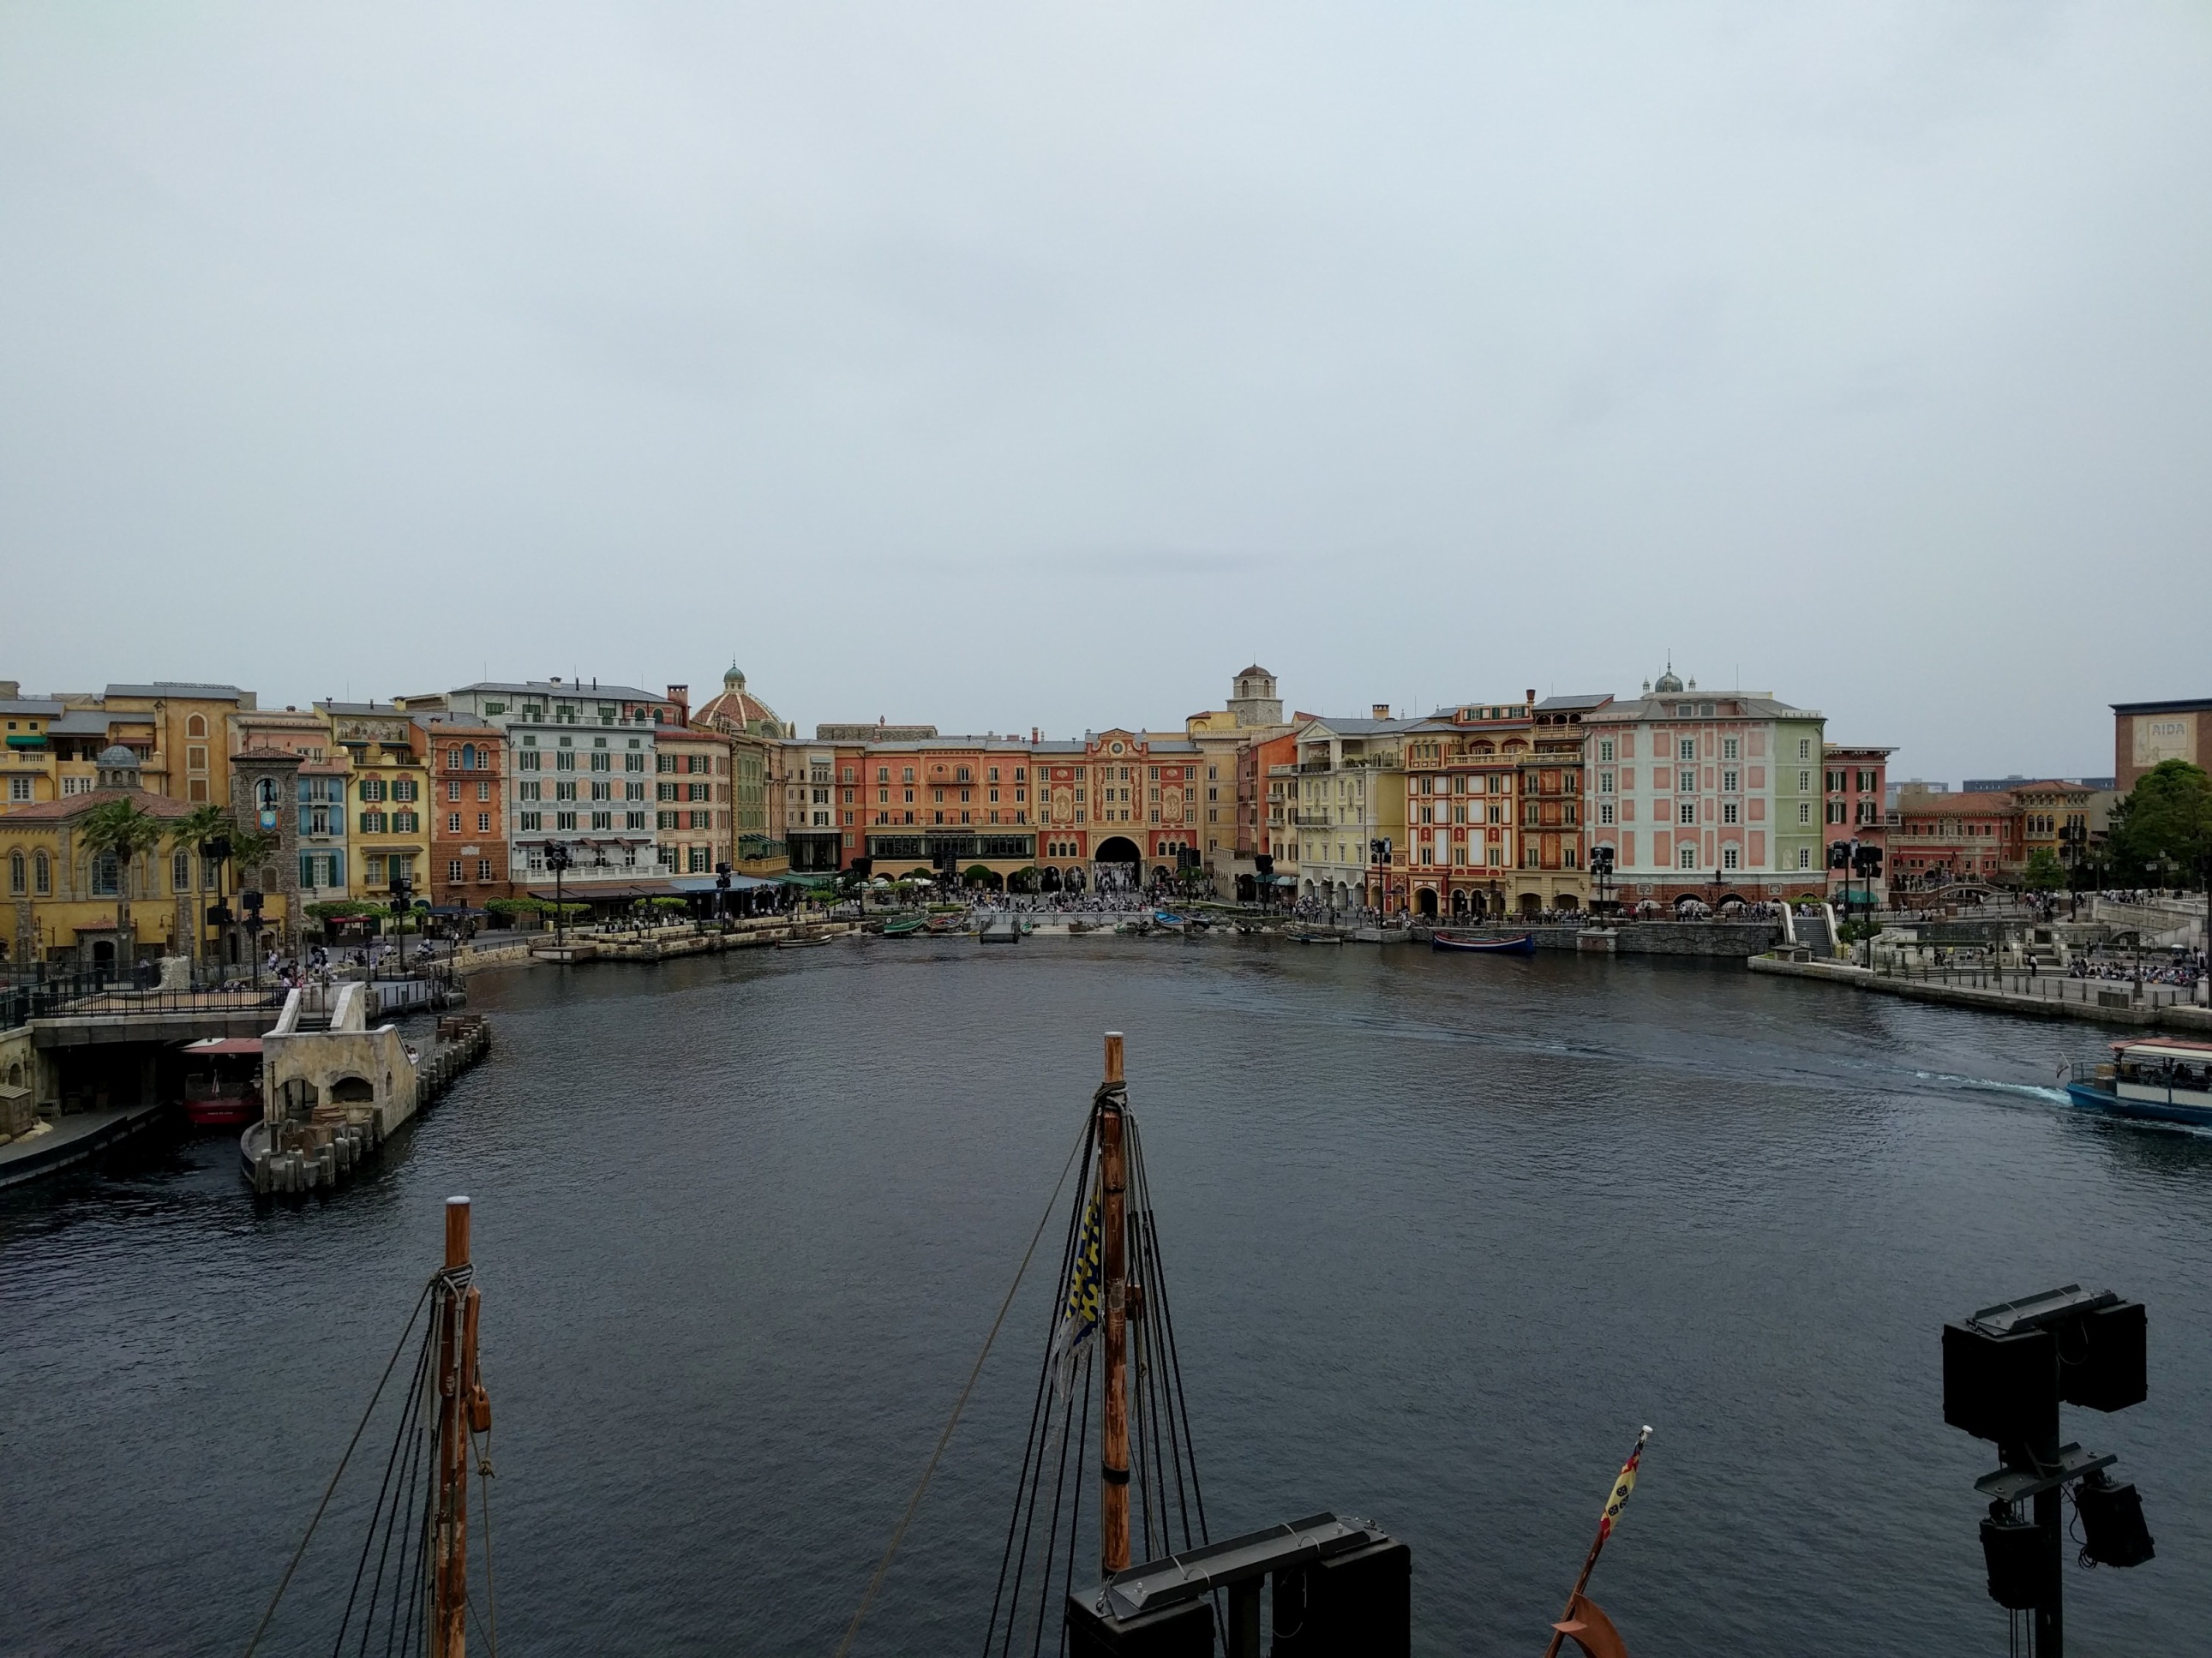 Views of the DisneySea entrance lake from the Fortress.